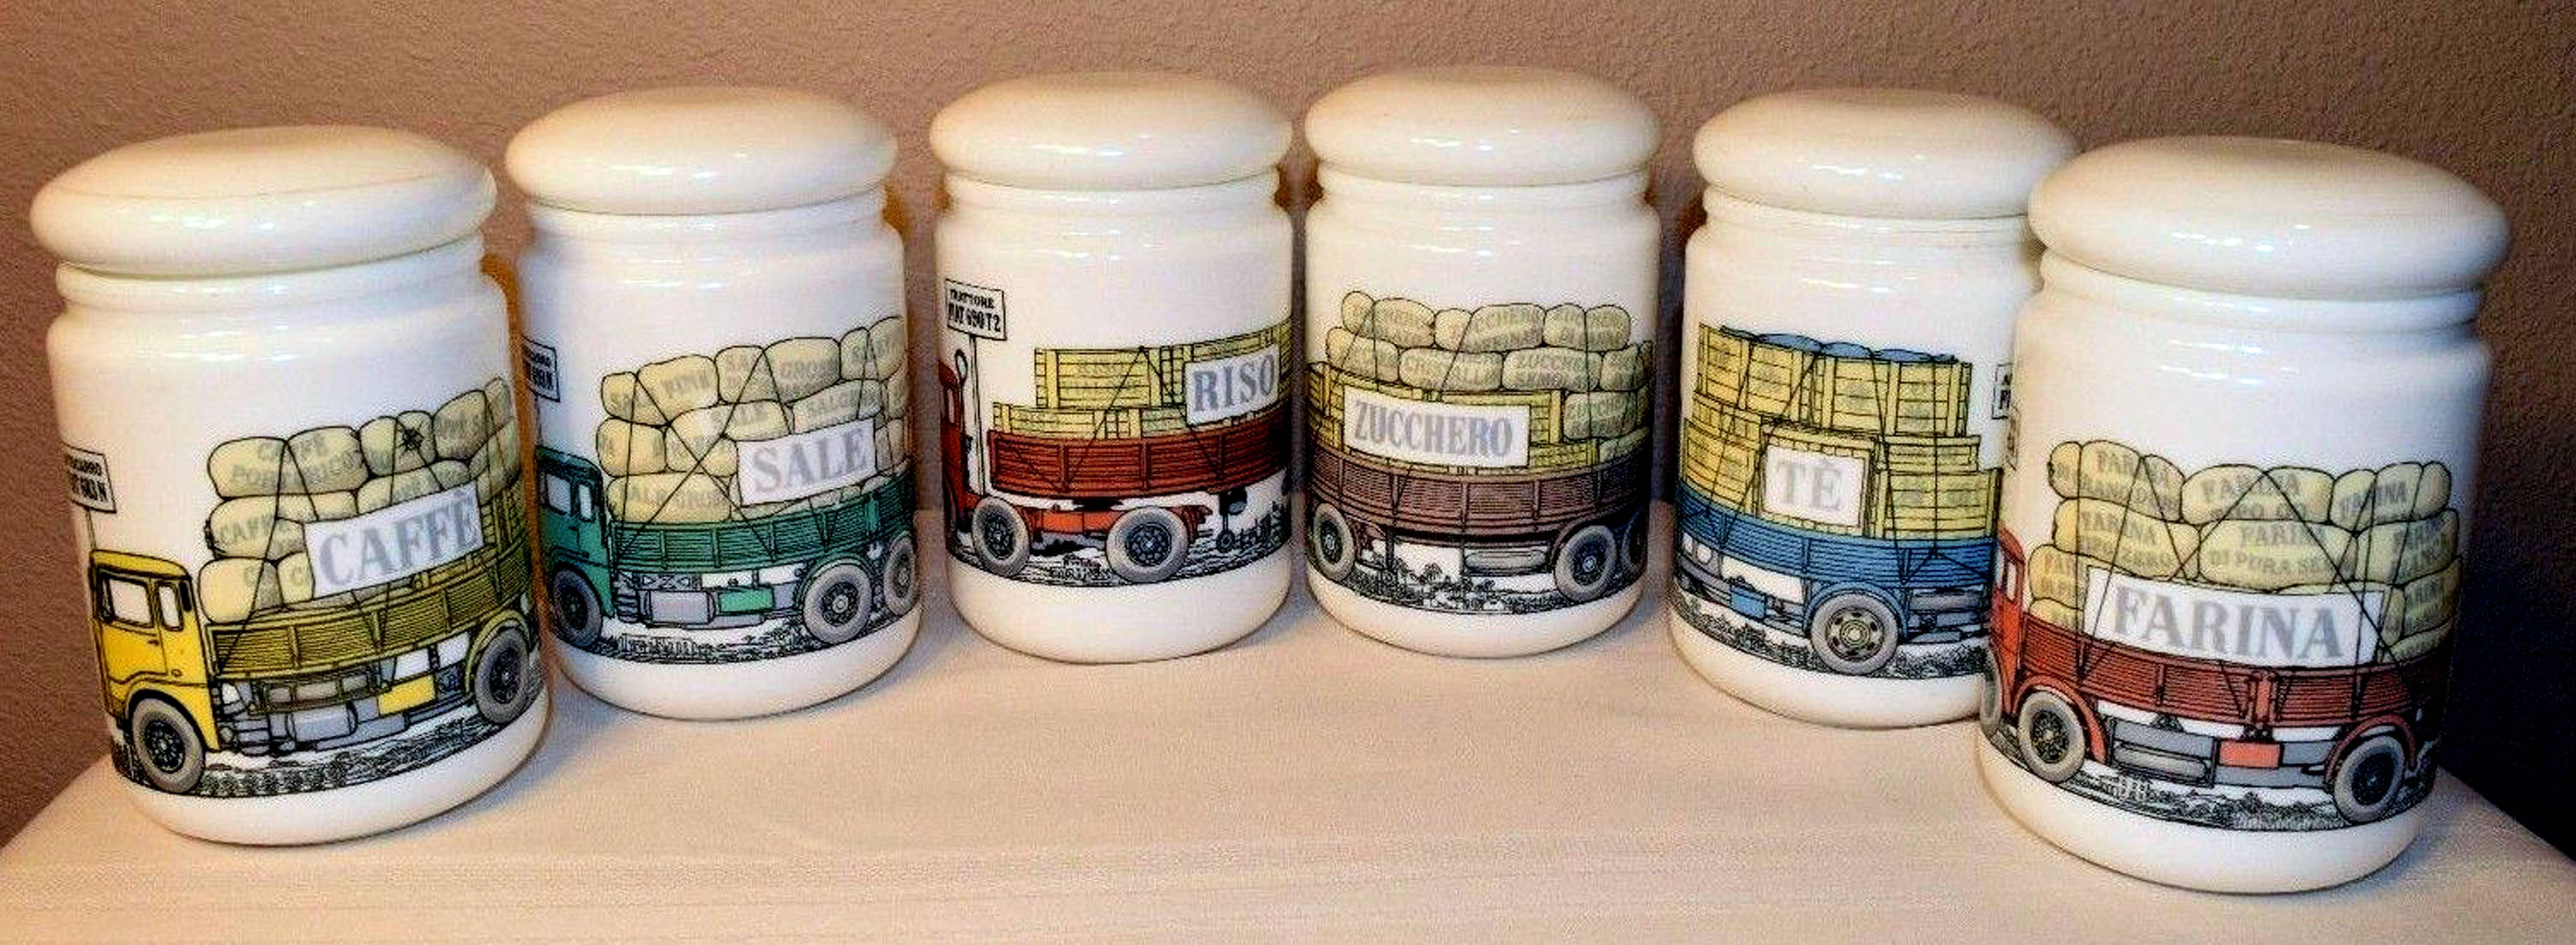 Vintage Trucks!

Piero Fornasetti opaque white glass jars and covers with trucks or lorry motif made for Fiat, Six Jars, 
circa 1960.

The truck-motif glass jars with lids were made for the Fiat Motor Company as promotional pieces- part of a